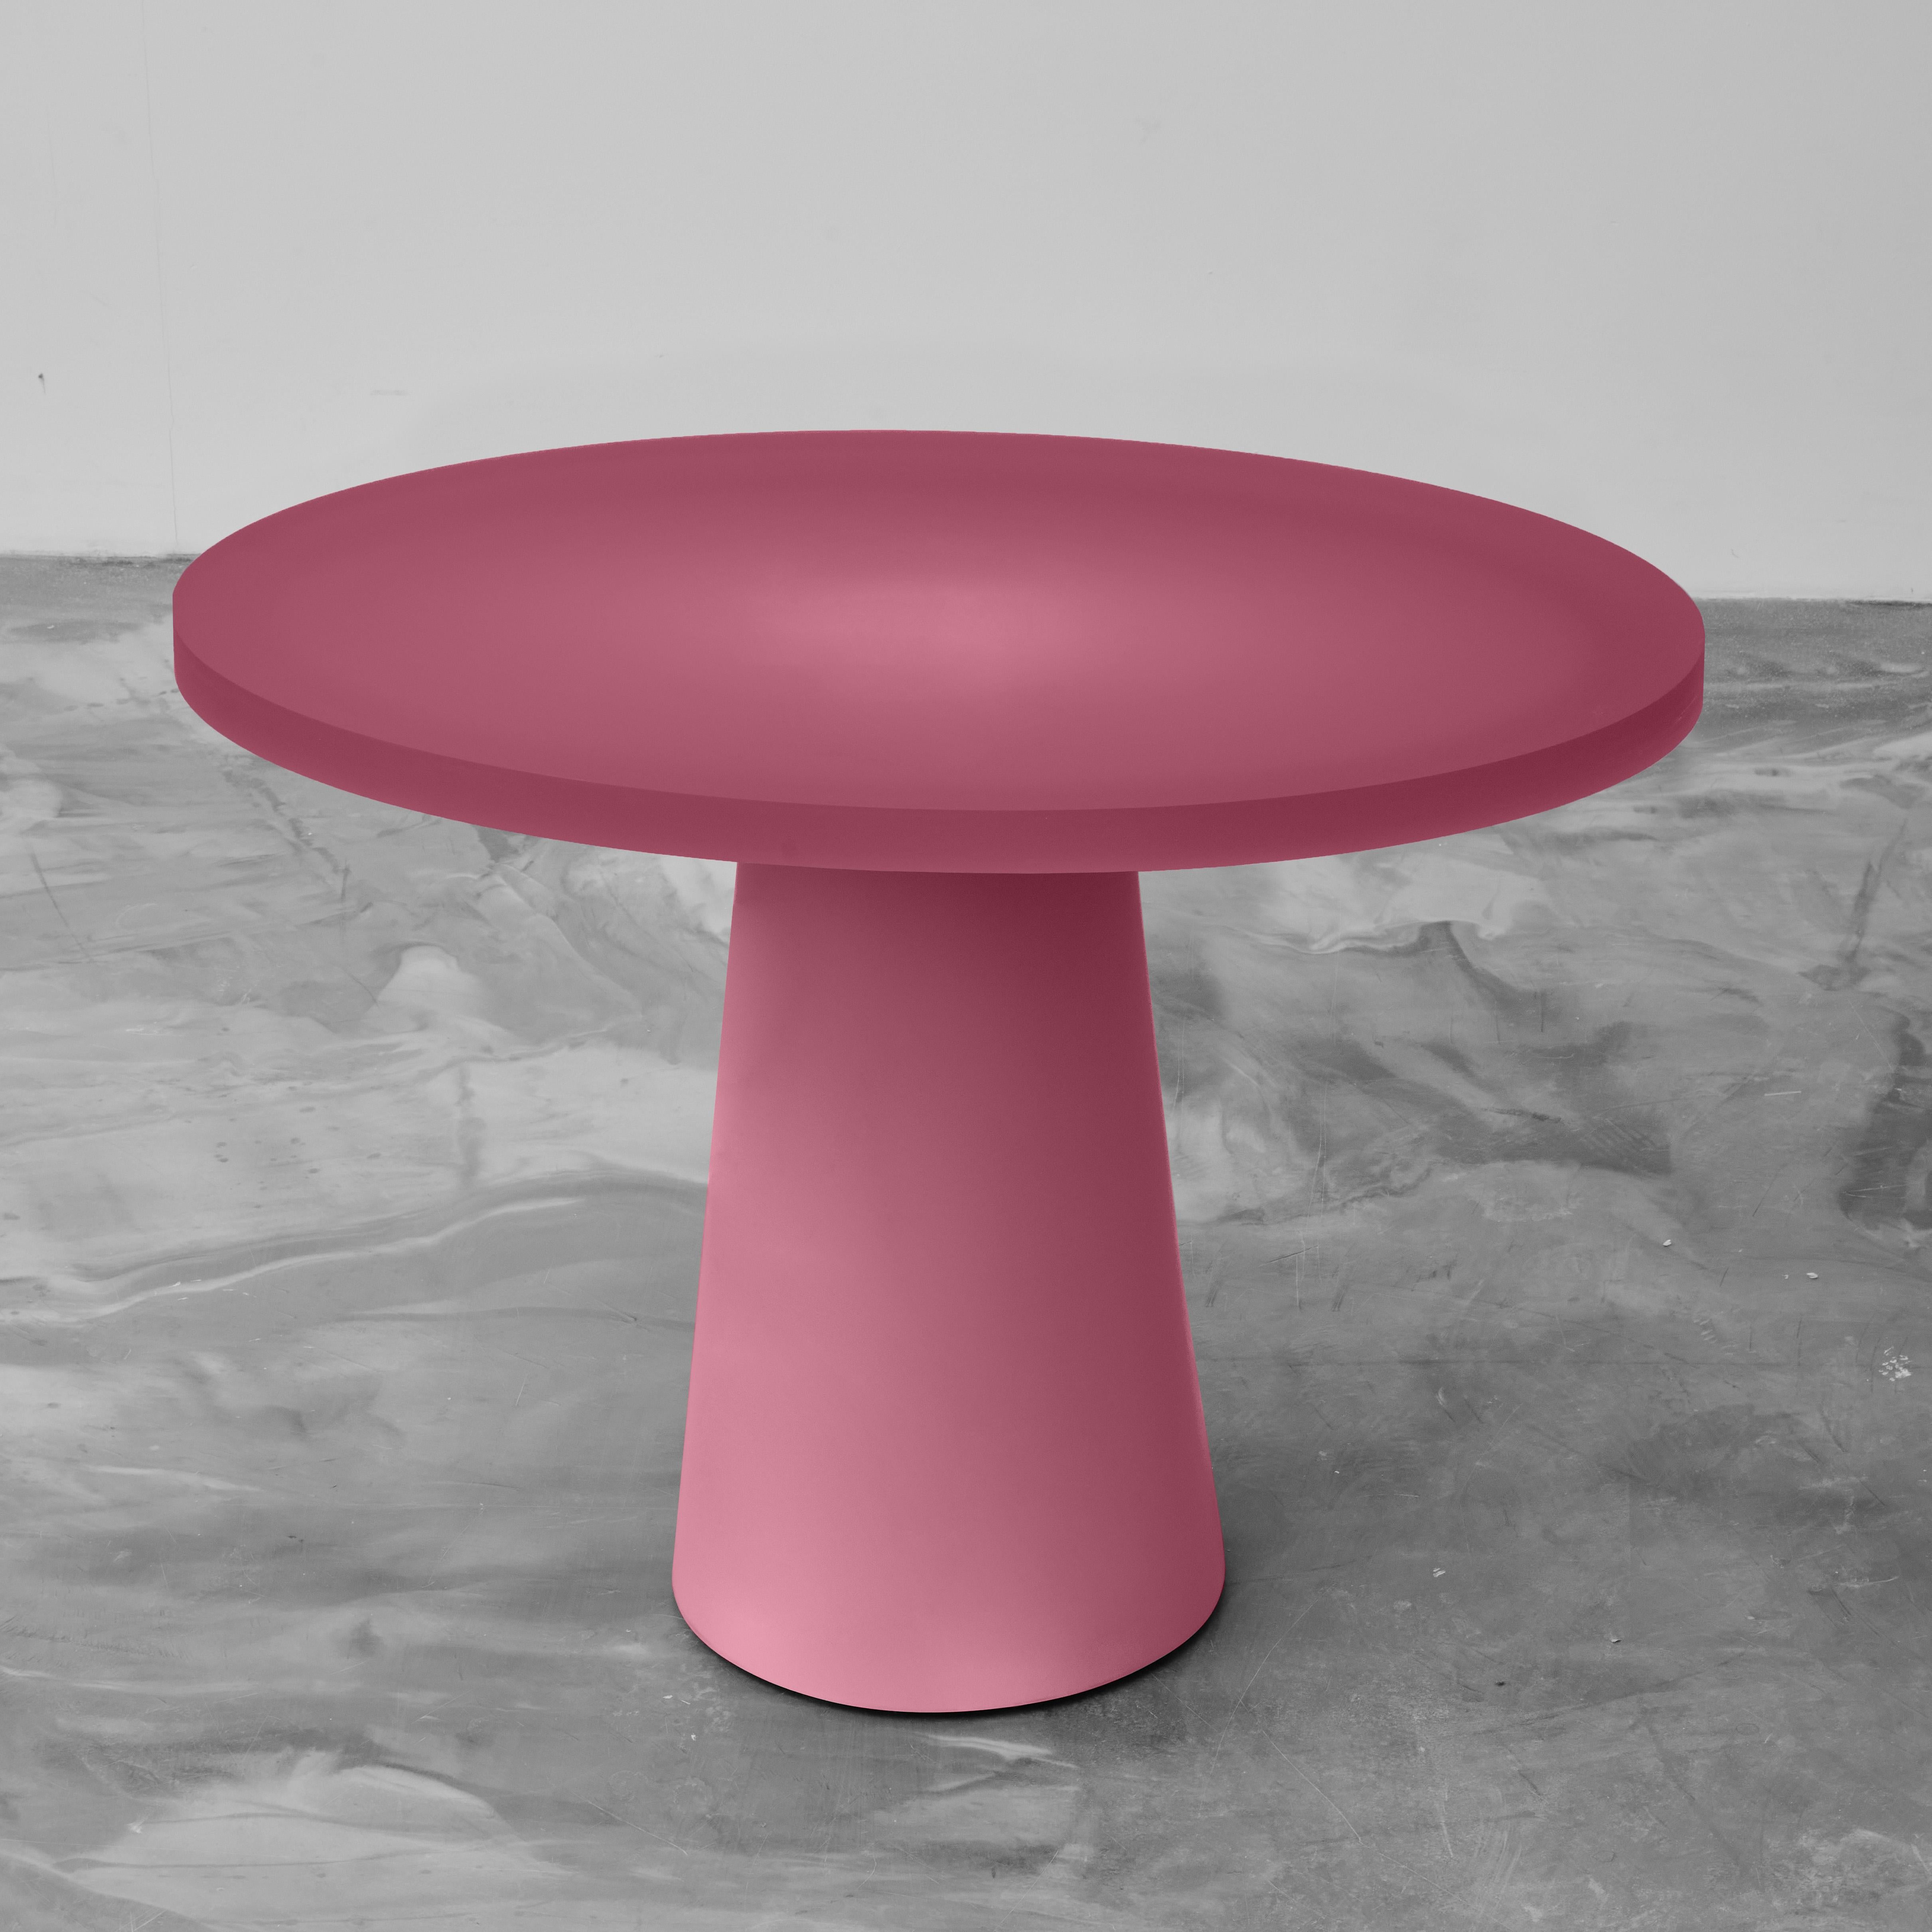 Contemporary Elliptical Entry Resin Table In Dusty Pink by Facture, REP by Tuleste Factory For Sale